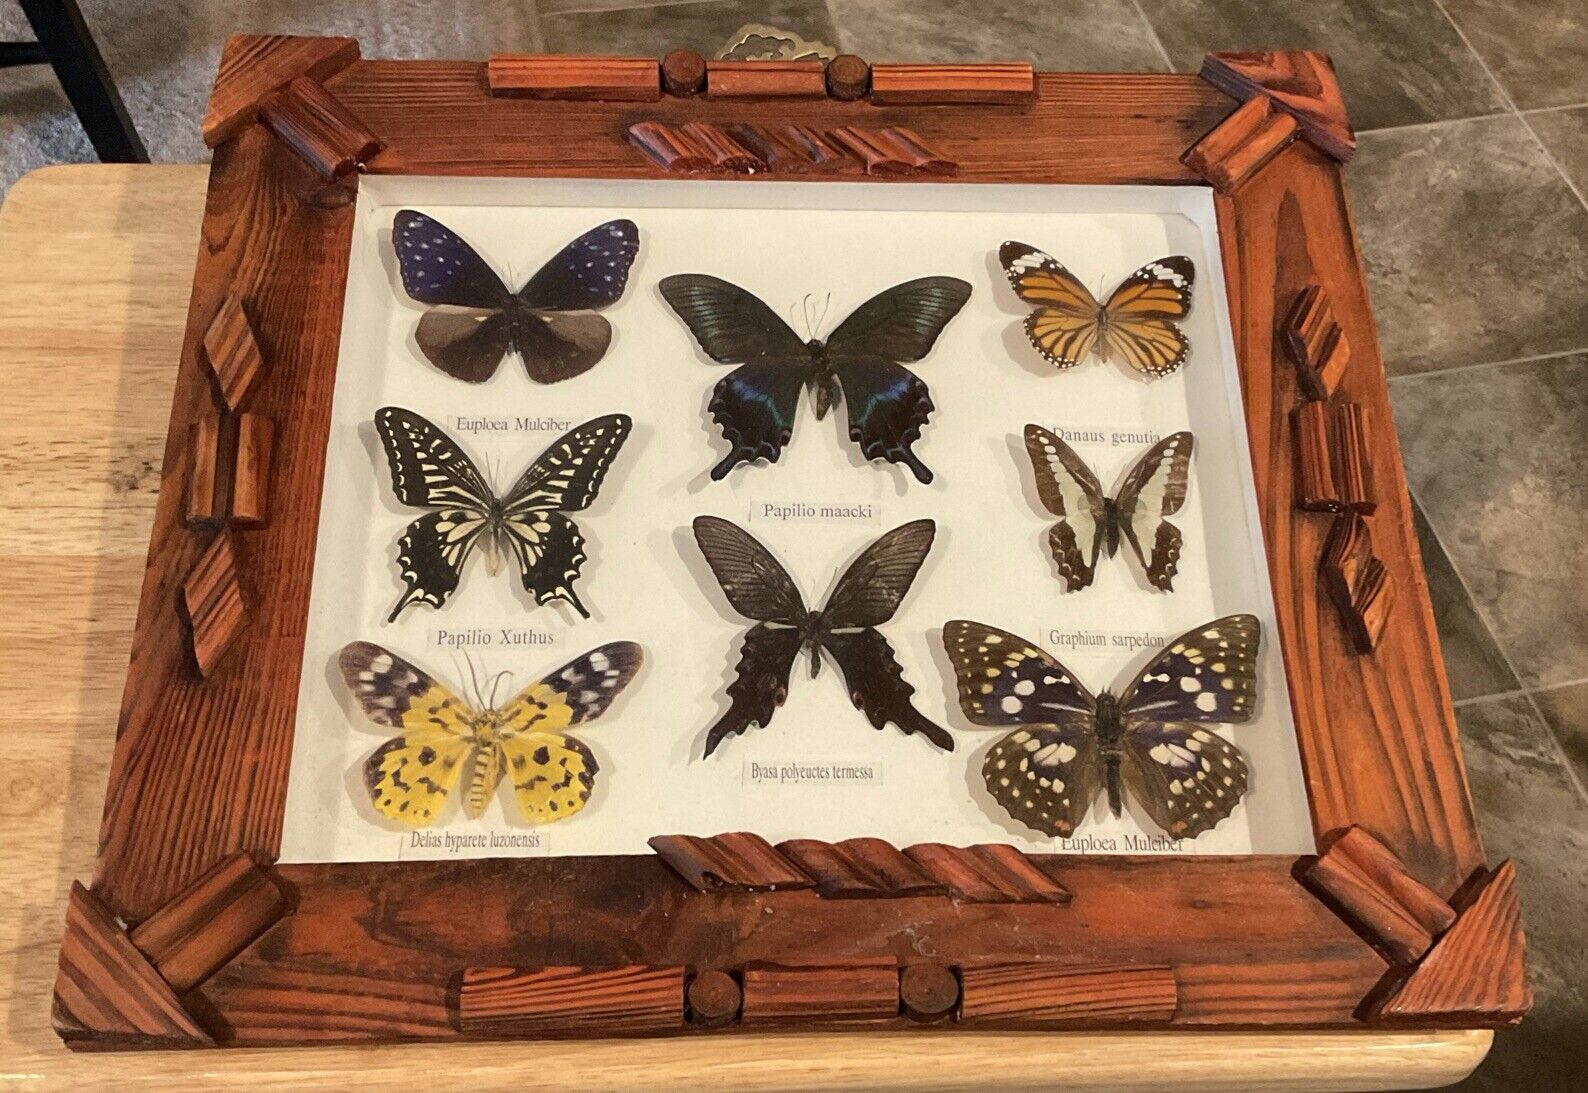 8 Count Butterfly Moth Mounted Taxidermy Display Handmade Wood Frame 15x13”